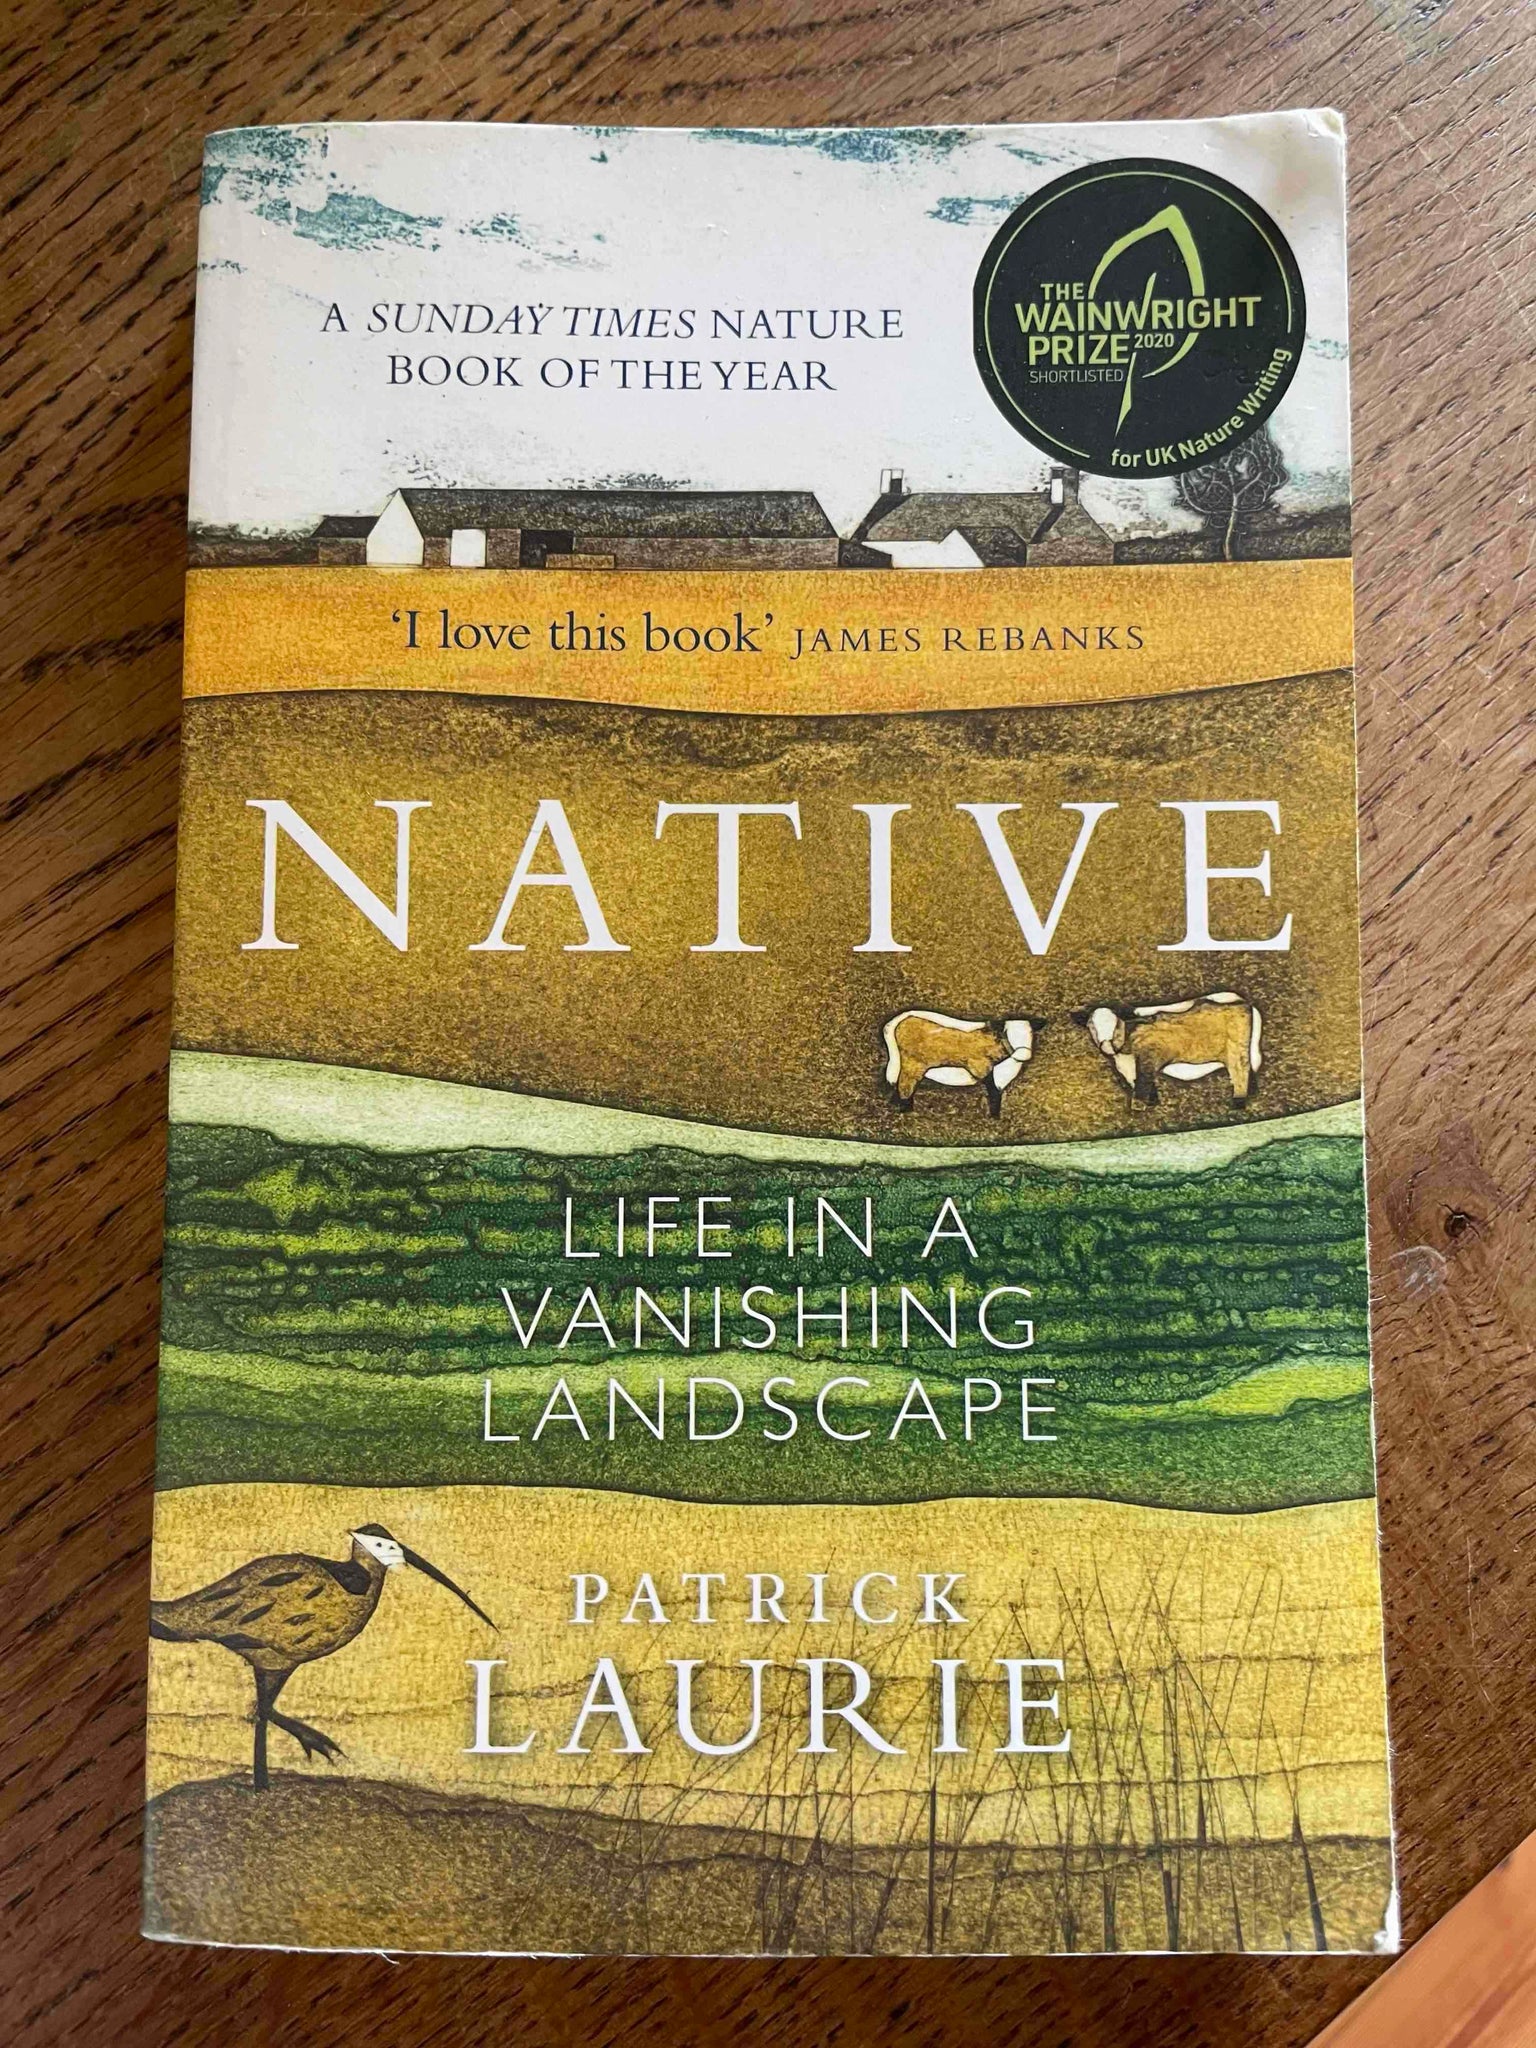 Native, by Patrick Laurie